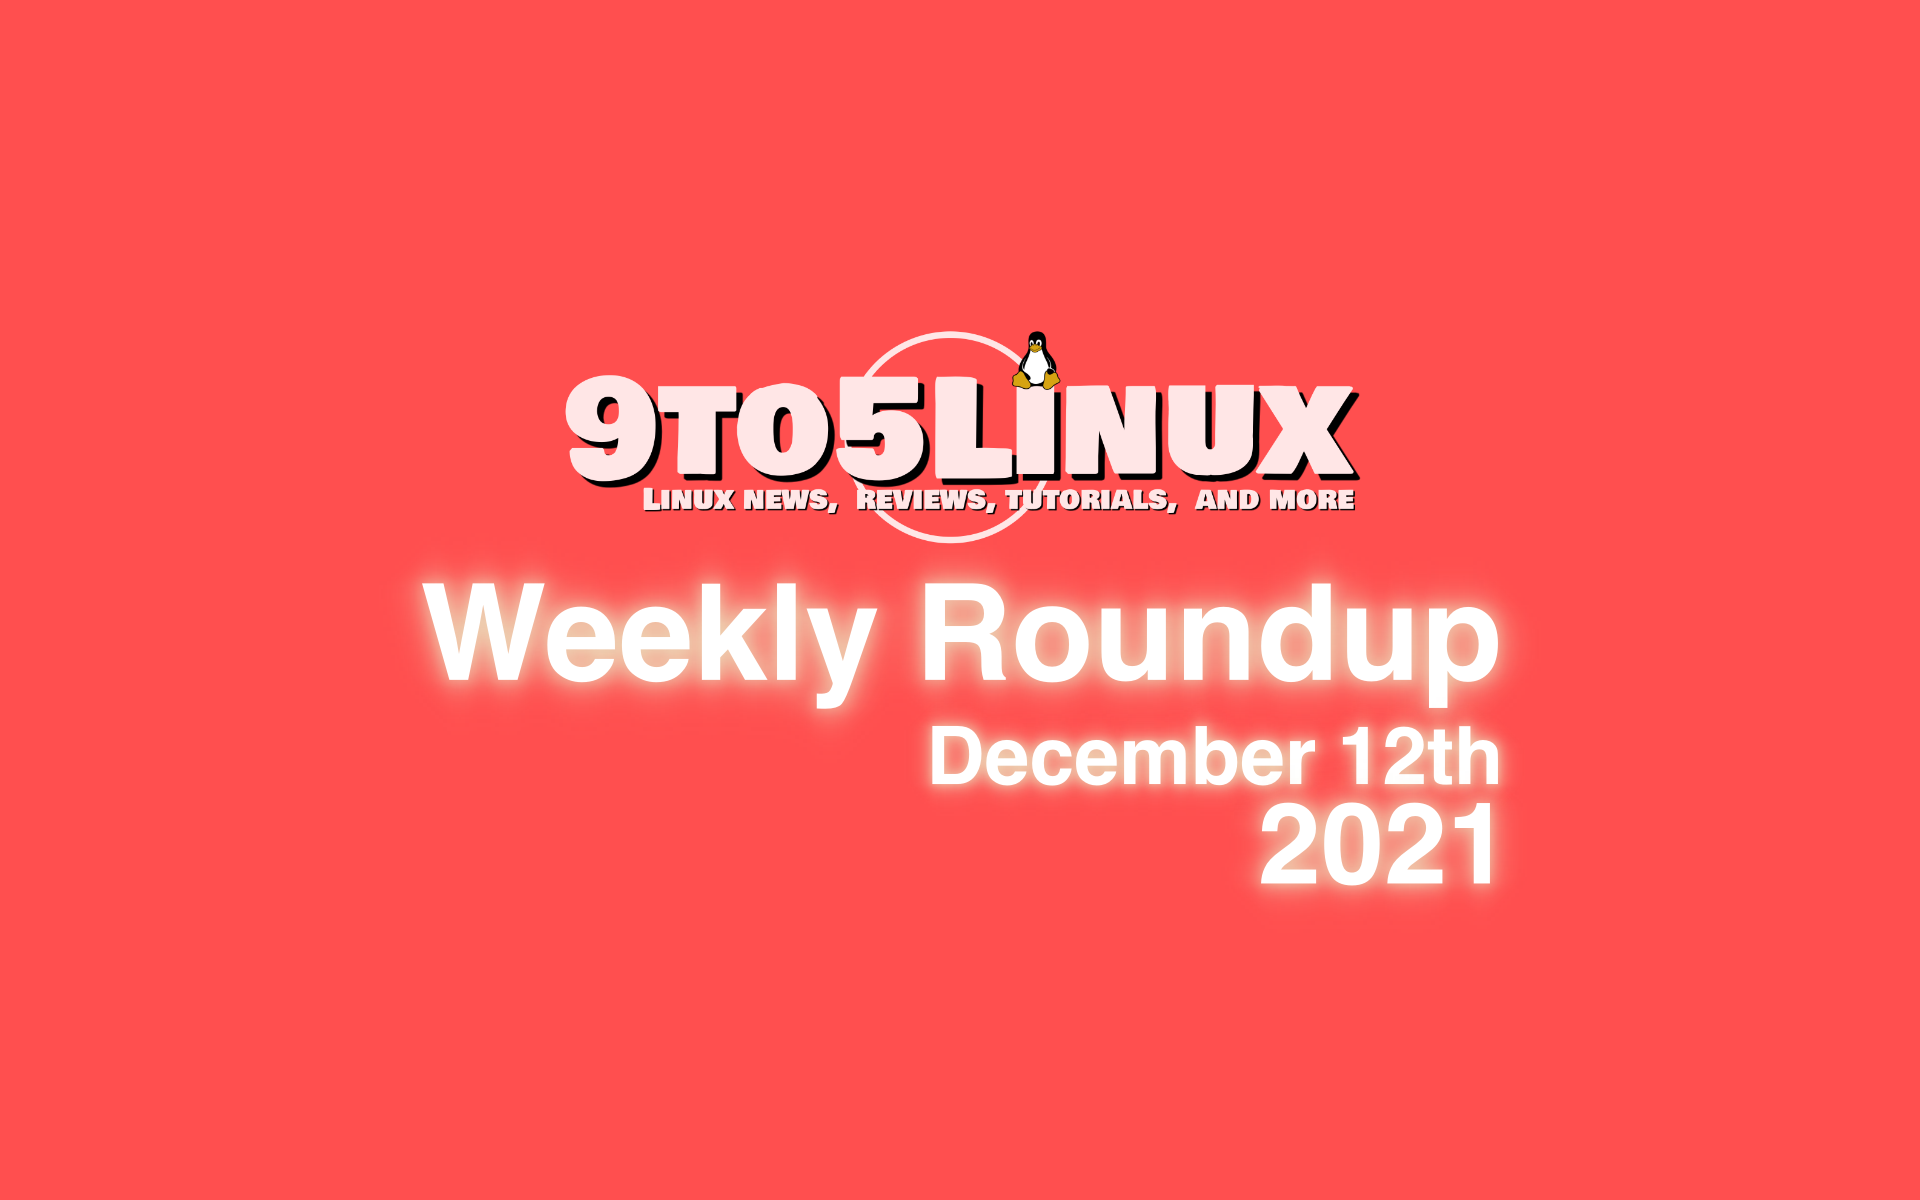 9to5Linux Weekly Roundup: December 12th, 2021